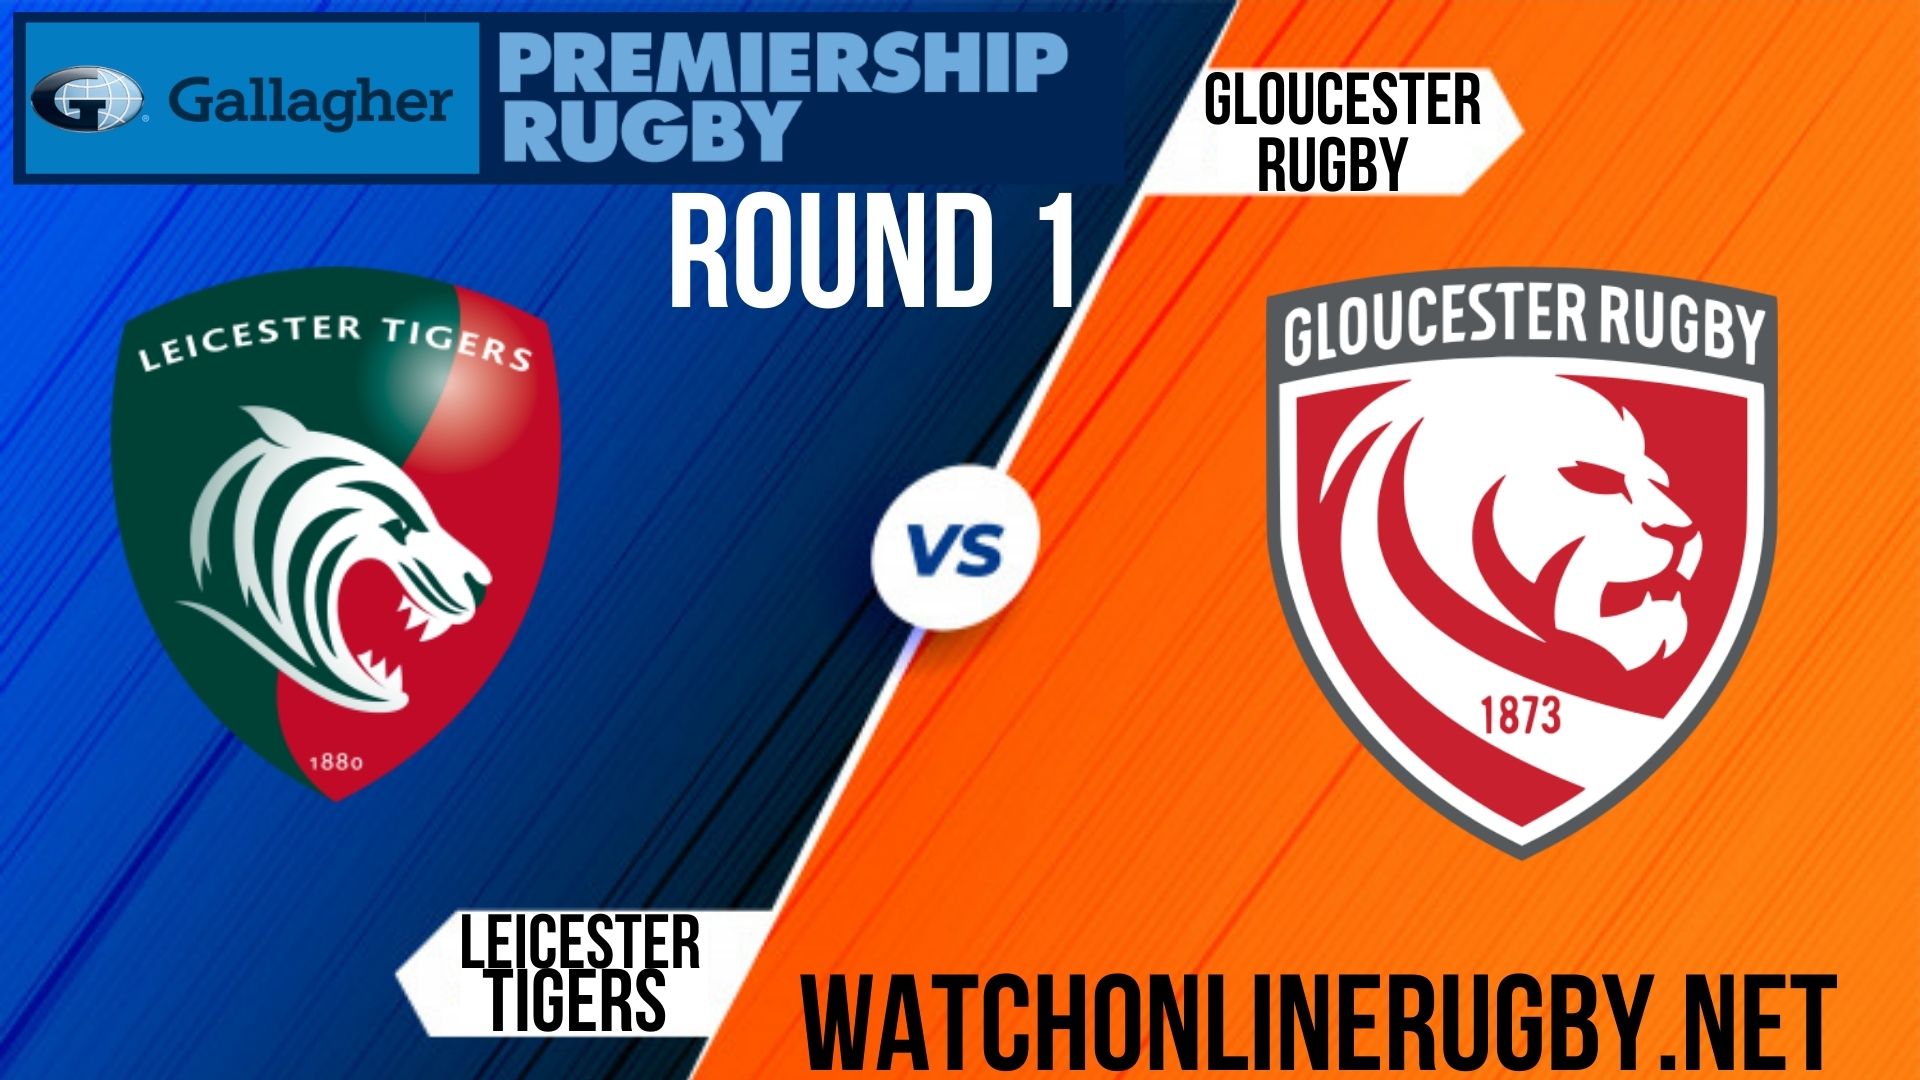 Leicester Tigers vs Gloucester Rugby Premiership Rugby 2020 RD 1